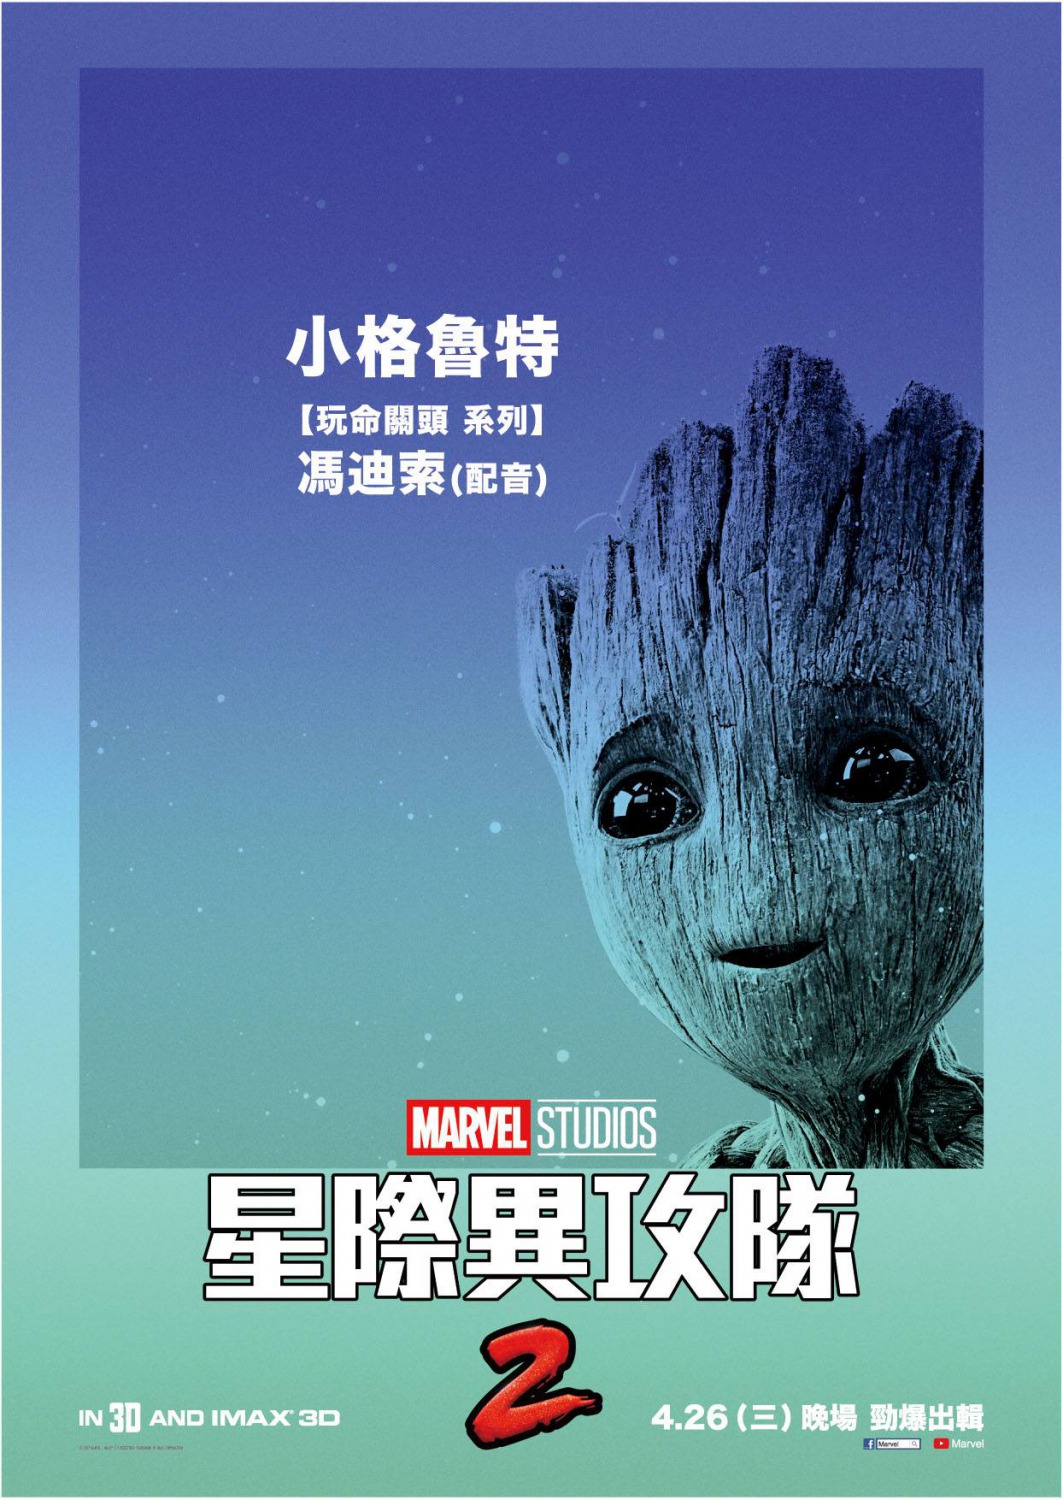 Extra Large Movie Poster Image for Guardians of the Galaxy Vol. 2 (#20 of 45)